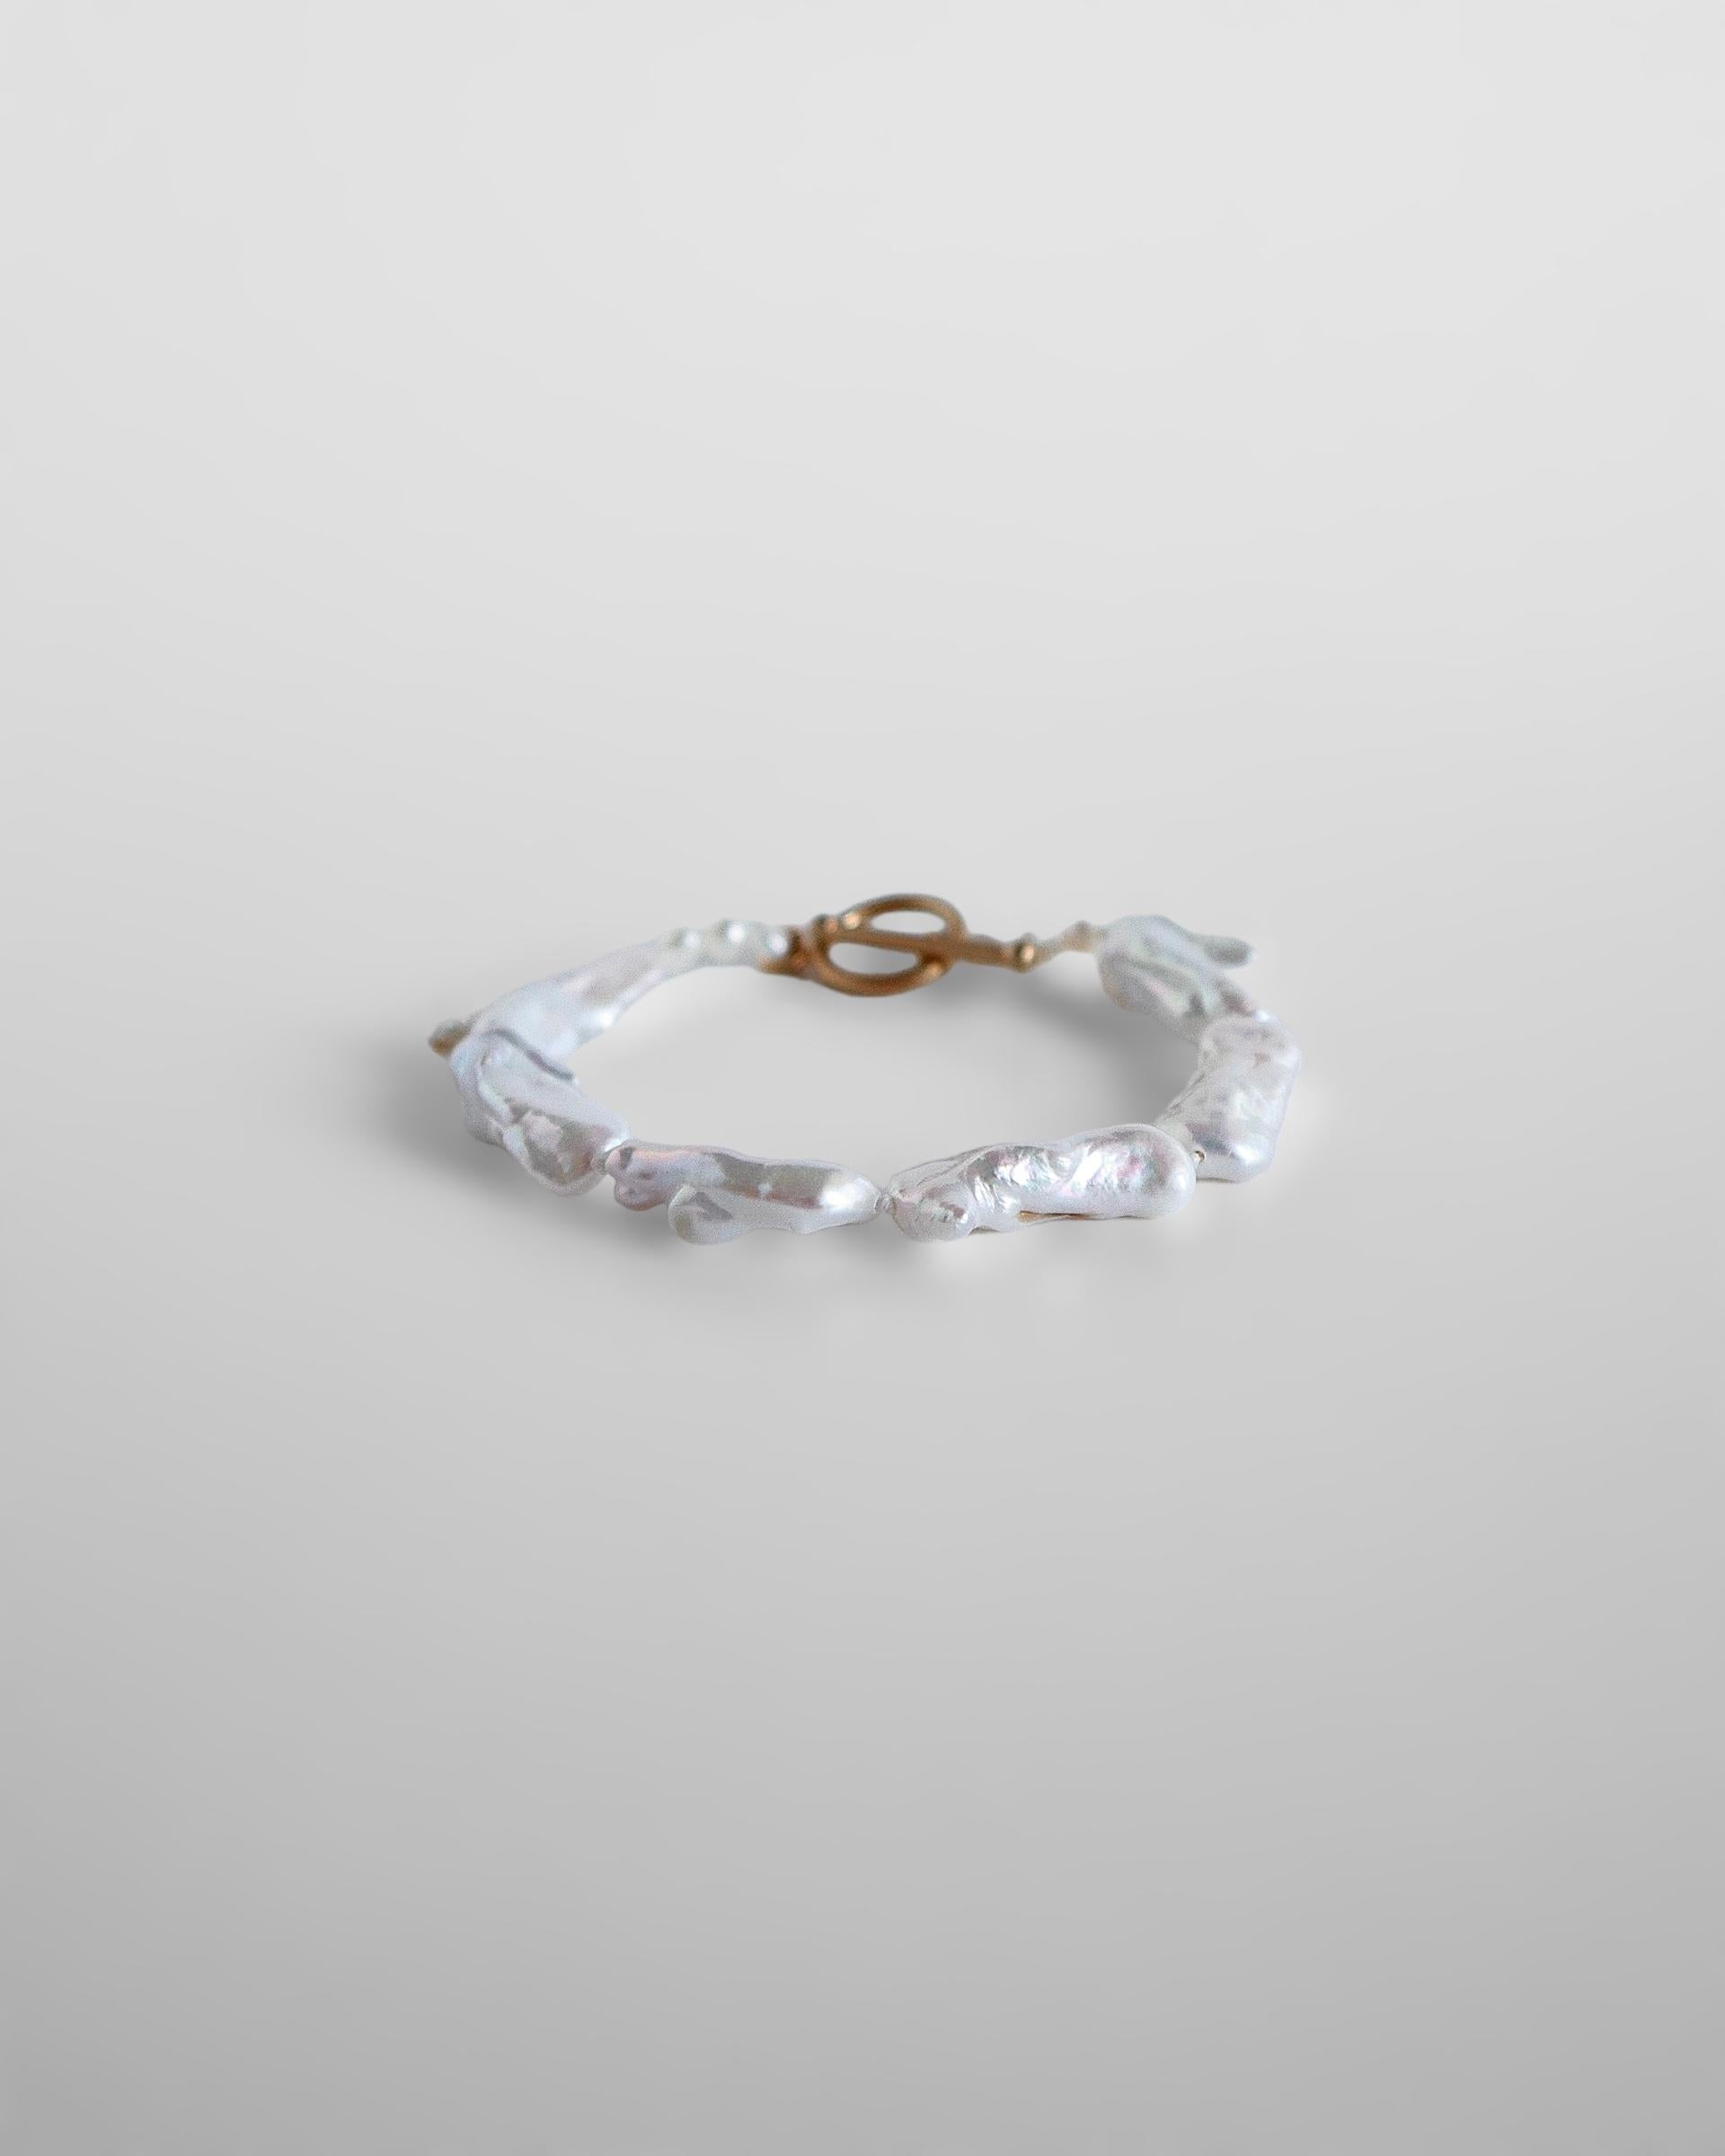 Indulge in the timeless sophistication of the Hera bracelet, a modern take on the classic pearl bracelet. Its beautifully designed clasp adds a touch of boldness to elevate your aesthetic effortlessly.

Ships within 2 weeks of order
4 month